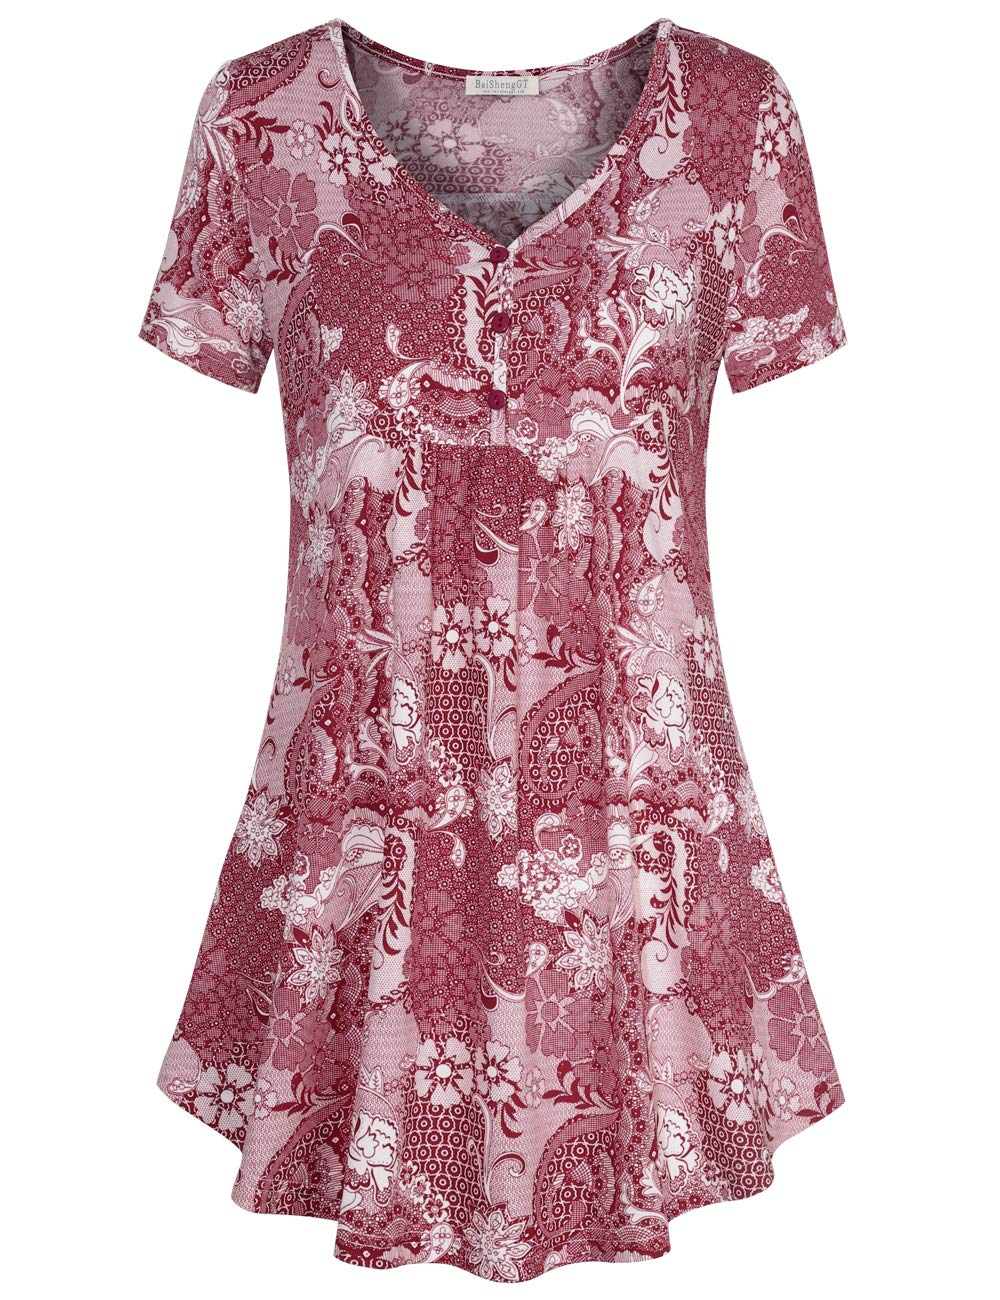 BAISHENGGT Women's Deep Red Print V Neck Buttons Pleated Flared Comfy Tunic Tops